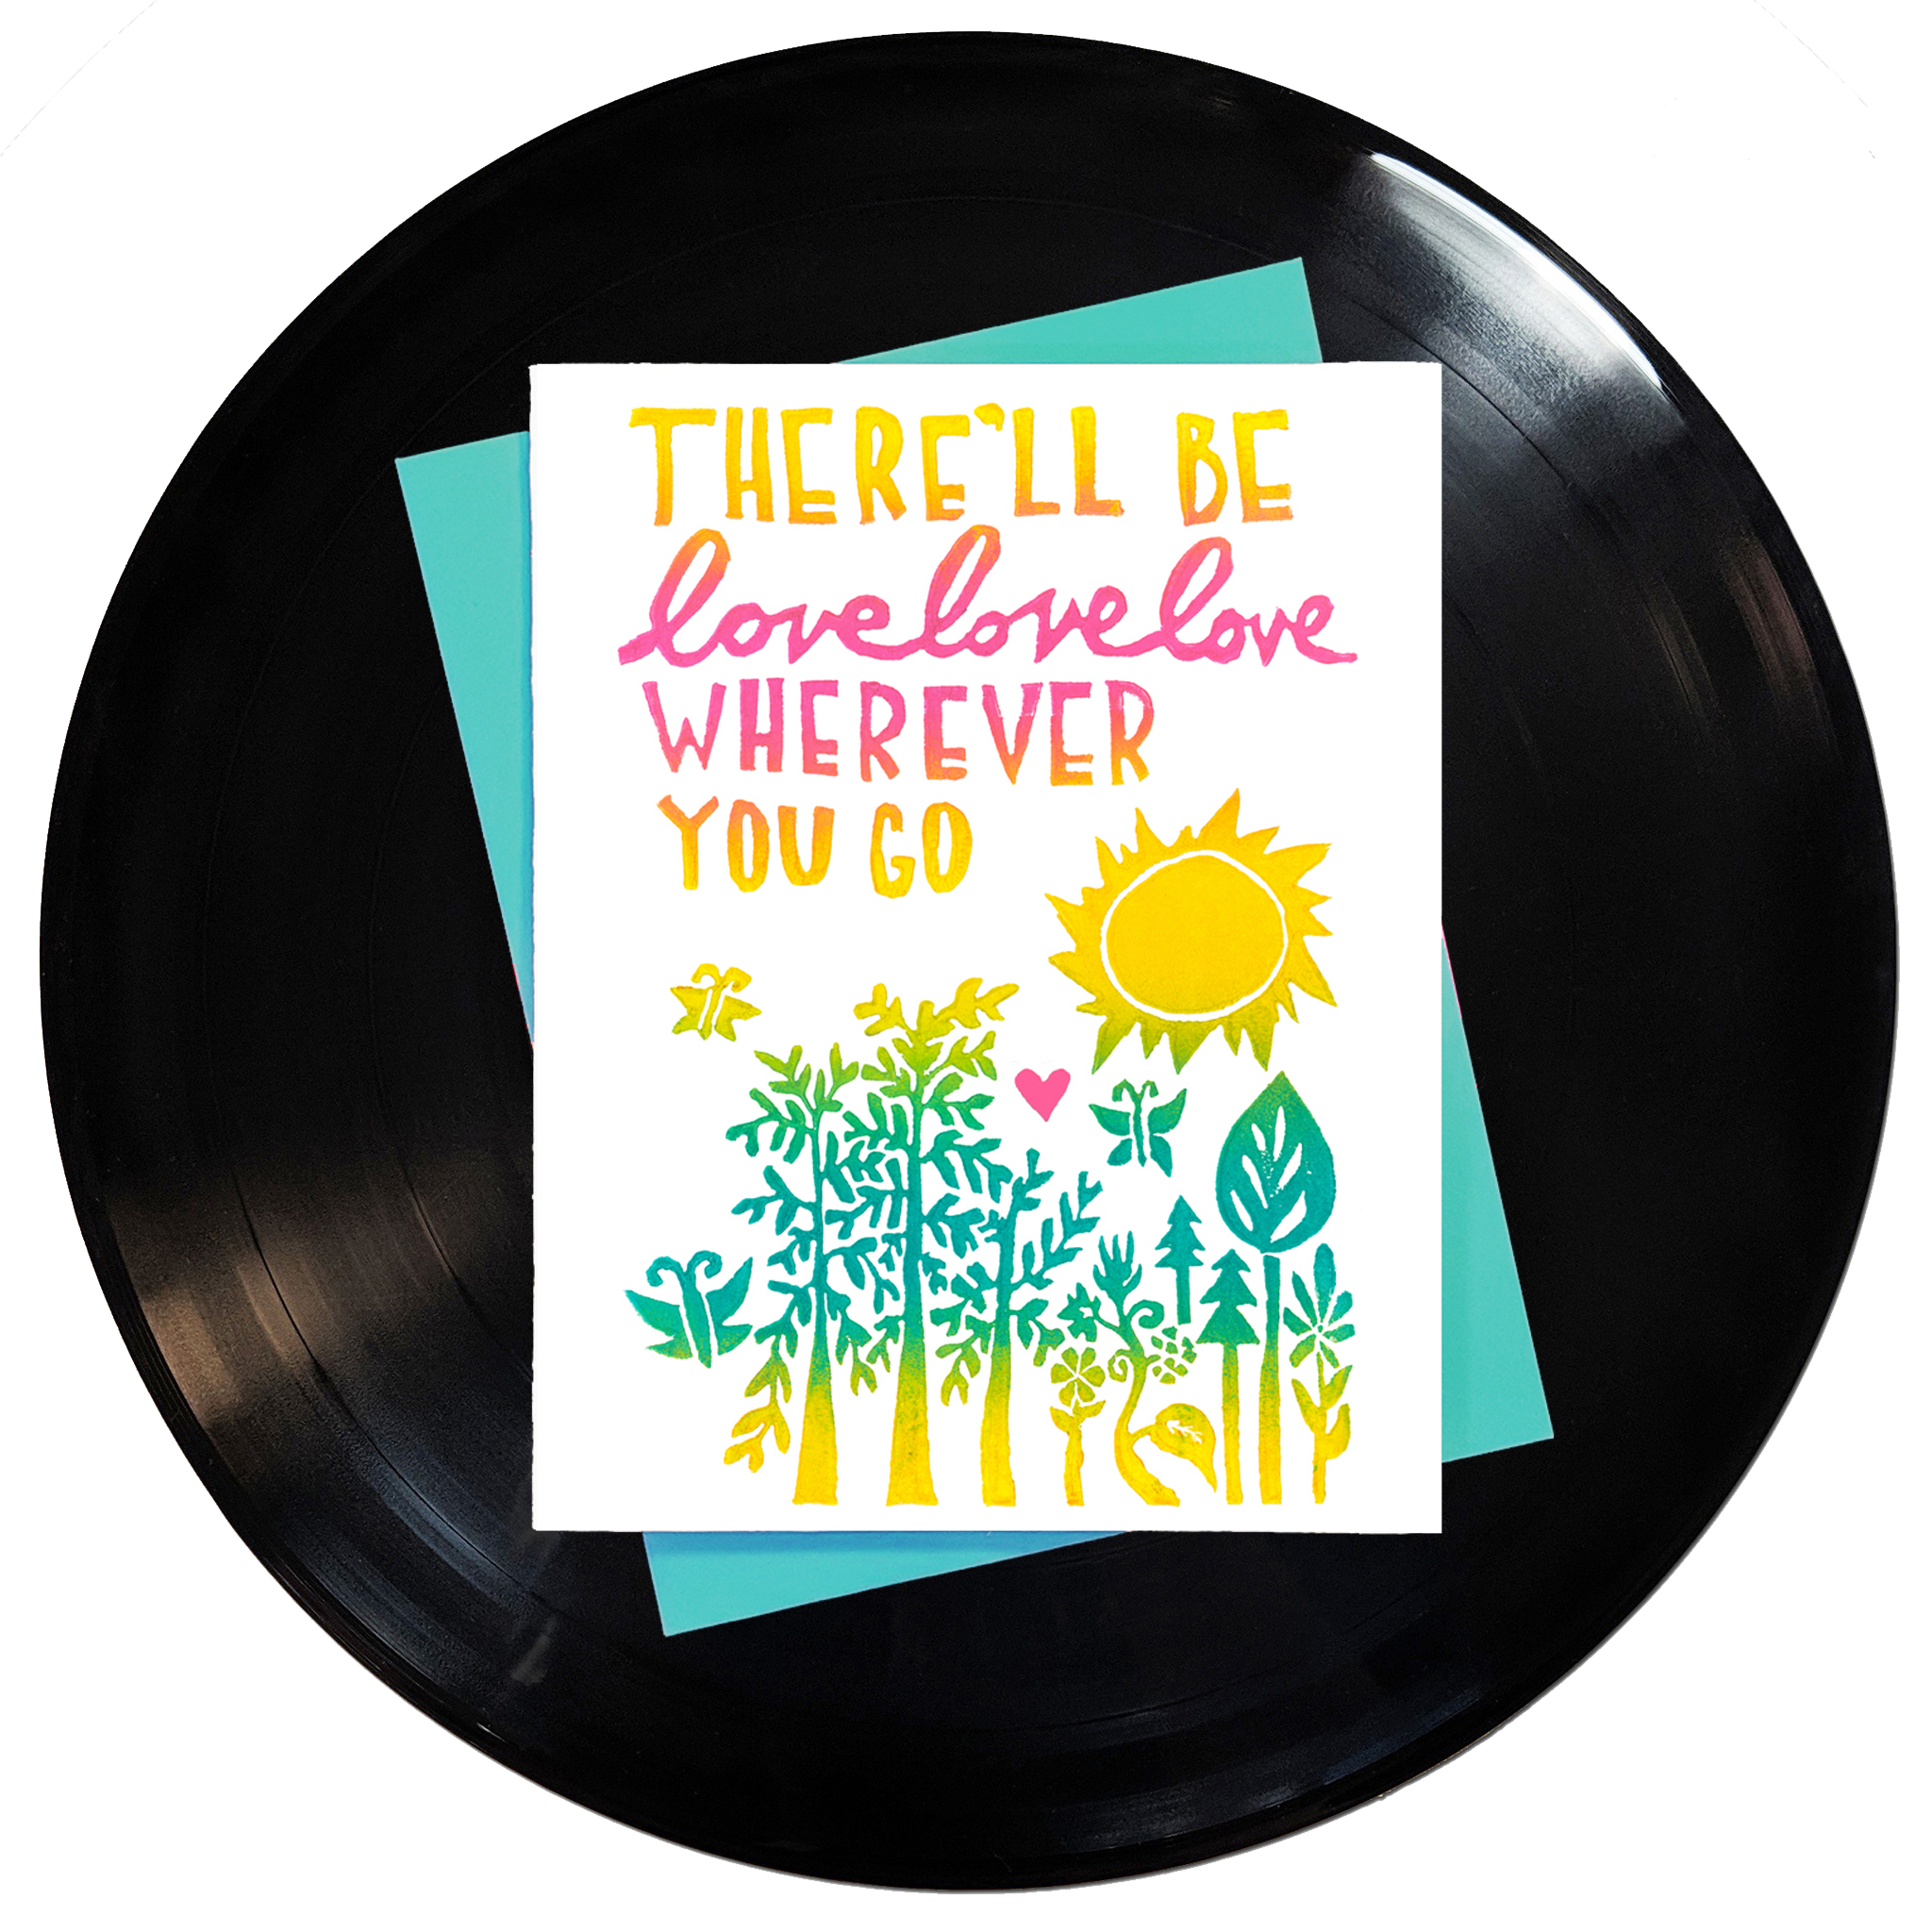 Love Love Love Wherever You Go Greeting Card 6-Pack Inspired By Music